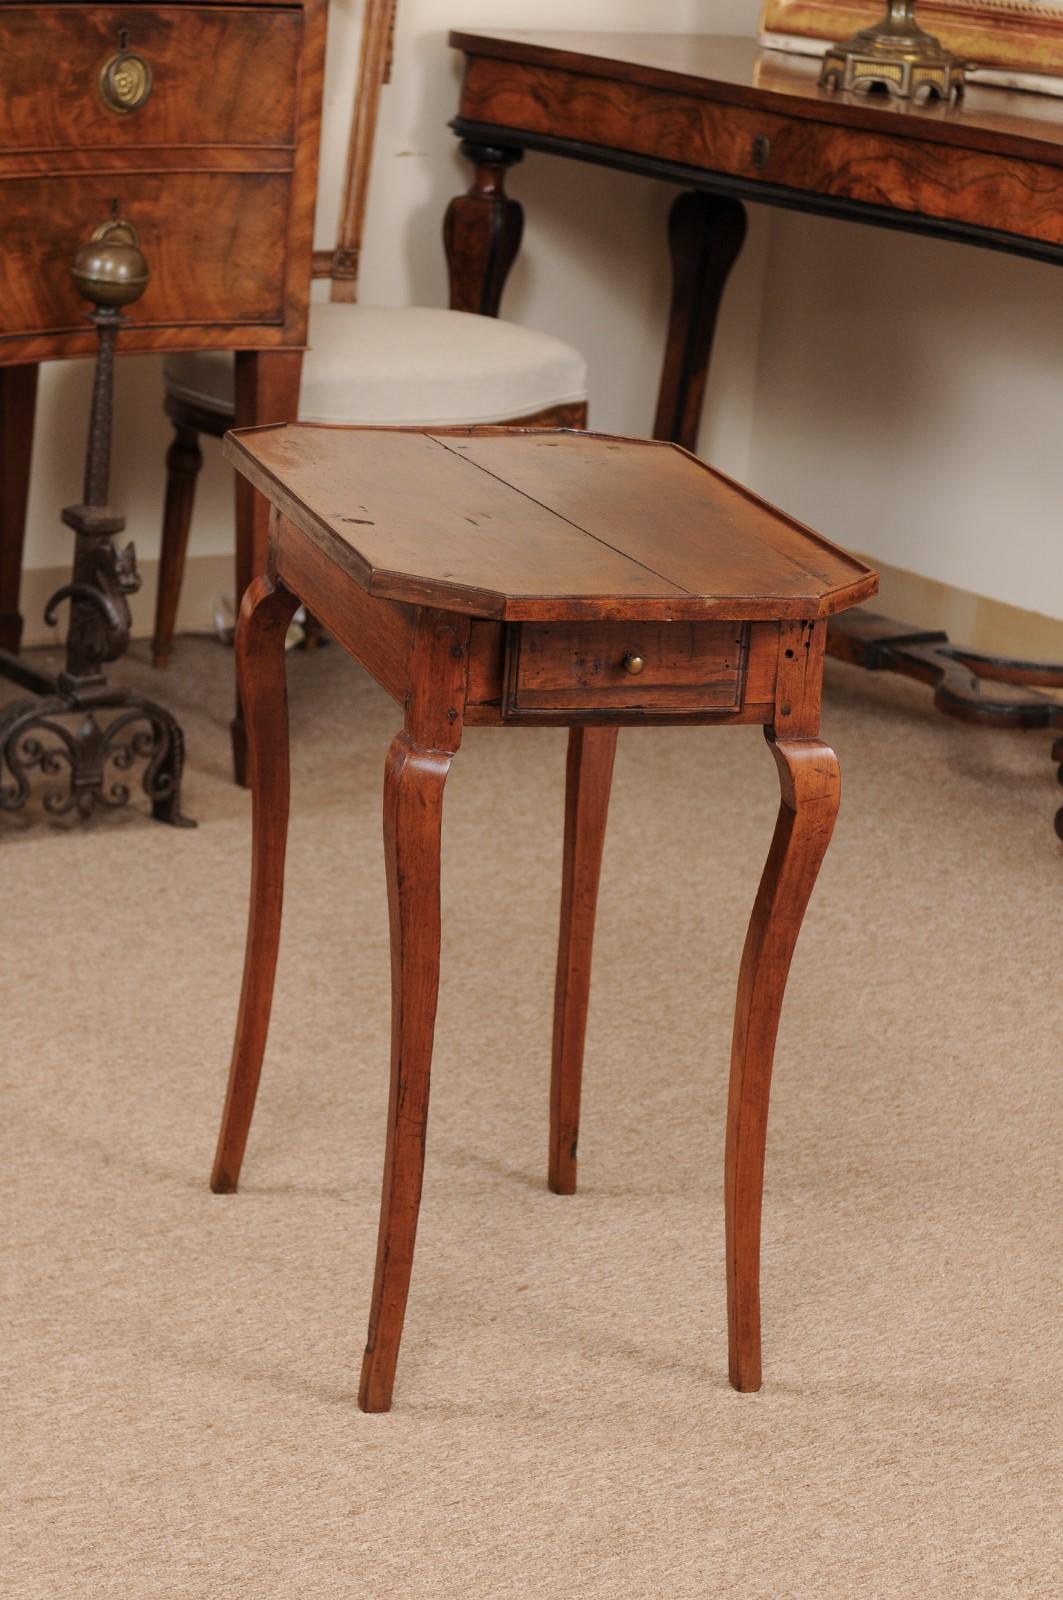 French Louis XV walnut side table with canted corners, drawer and cabriole legs.